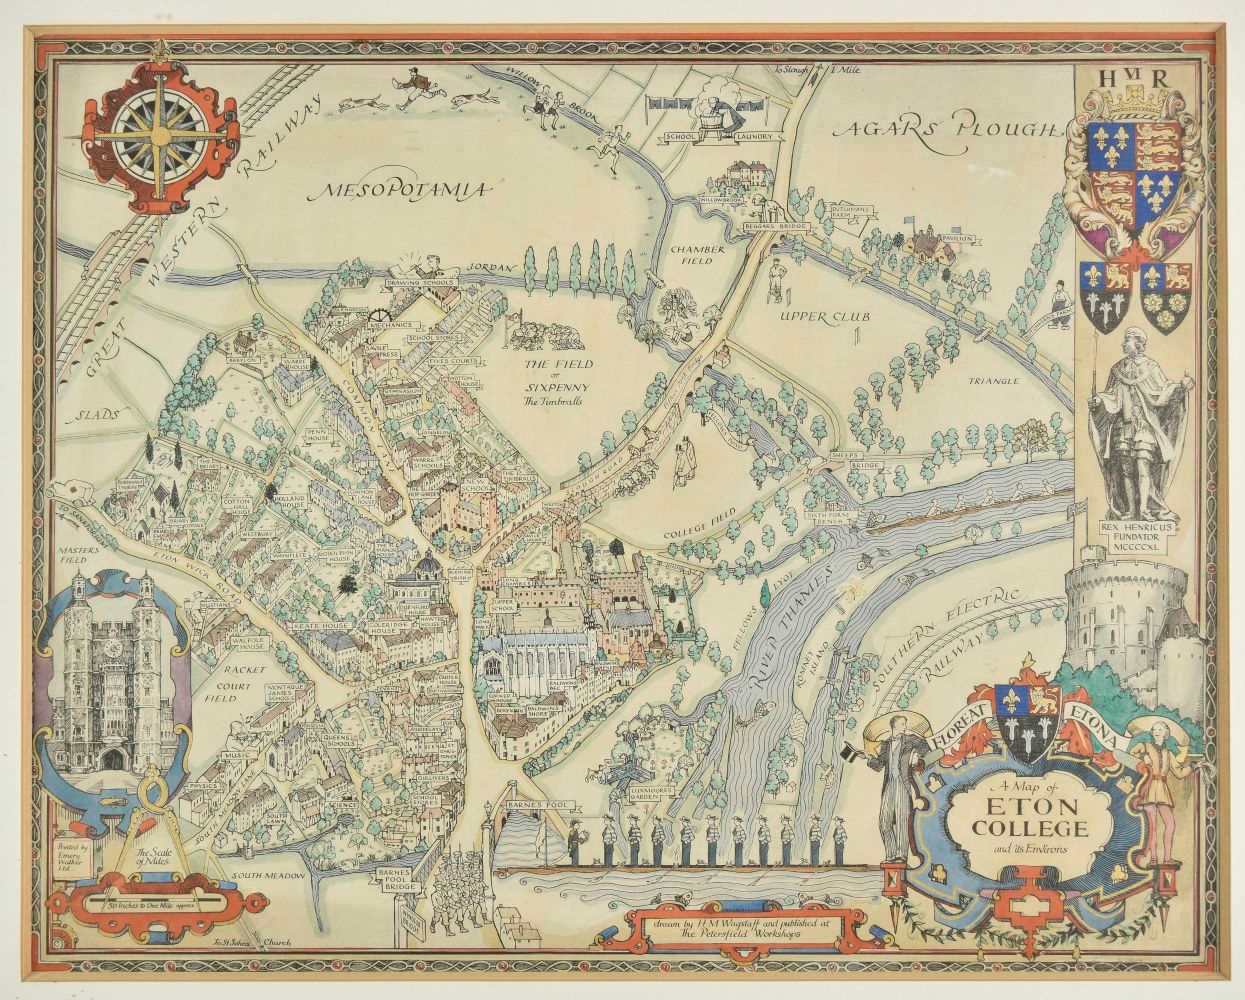 Lot 44 - Eton. Wagstaff (H. M.), A Map of Eton College and its Environs, circa 1948